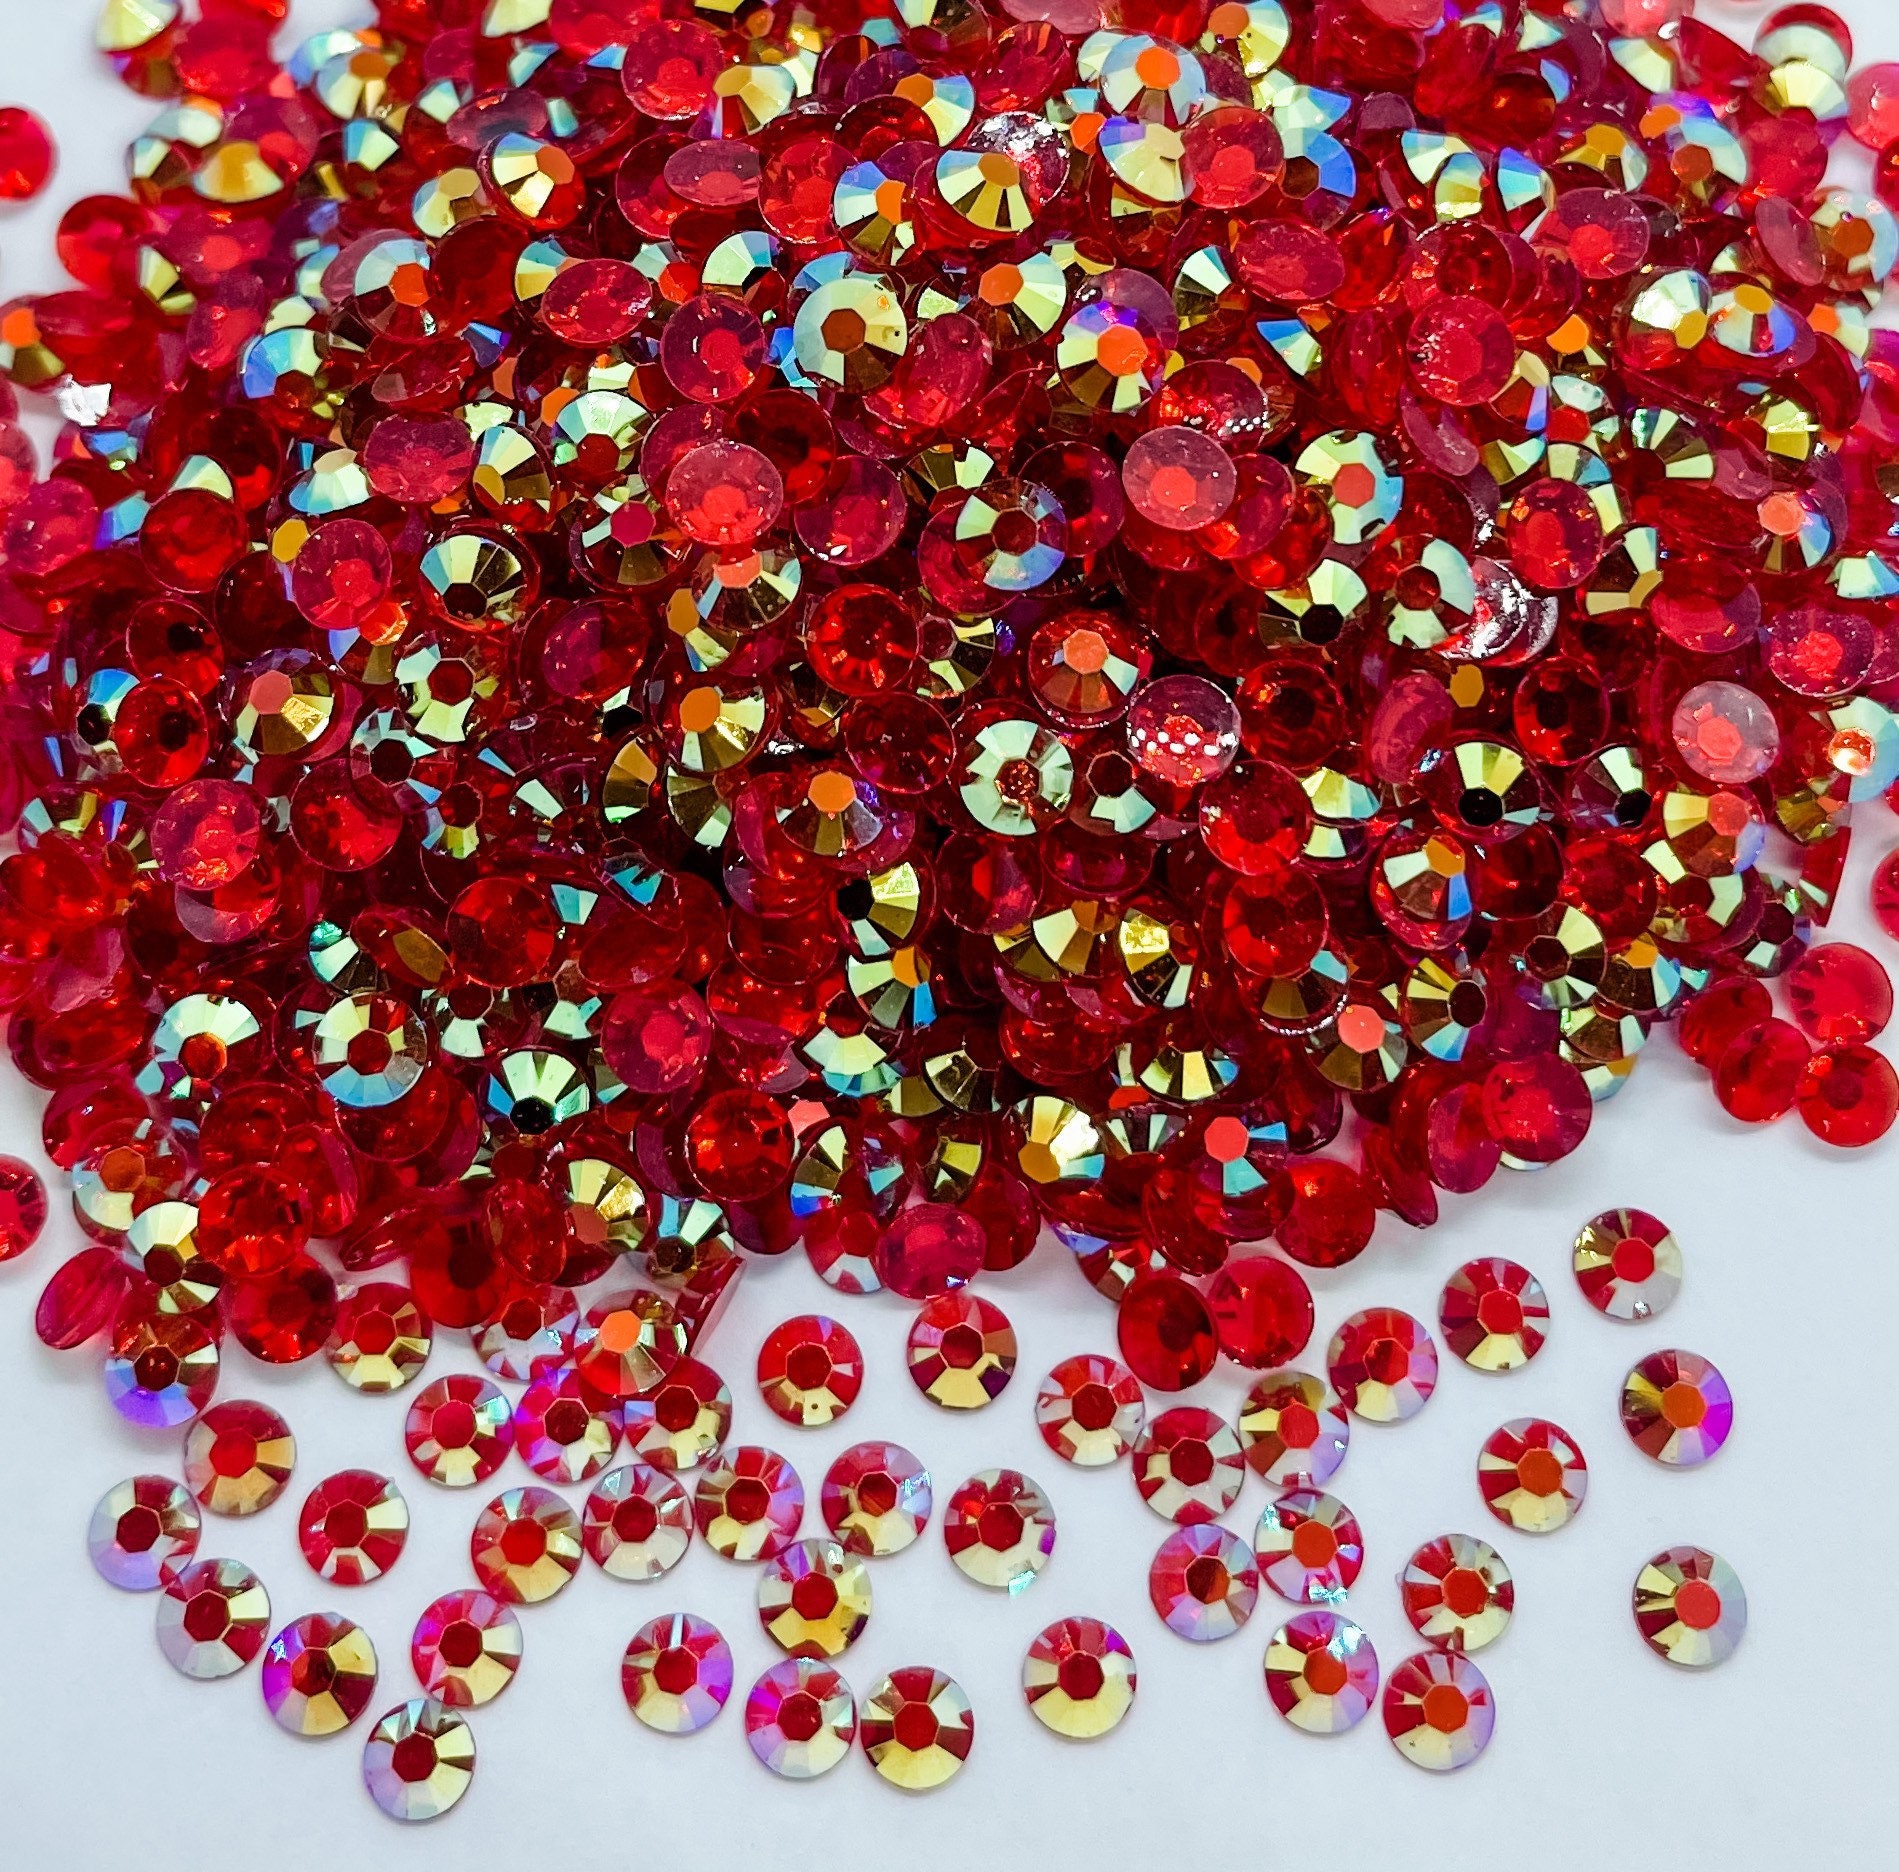  4000Pcs Resin Rhinestones3MM Rose Red AB Round Flatback  Jelly Rhinestones For Crafts DIY Crystal Gems Shiny Diamond For Nails  Design Rhinestones Bulk Tumblers Face Makeup Clothes Shoes